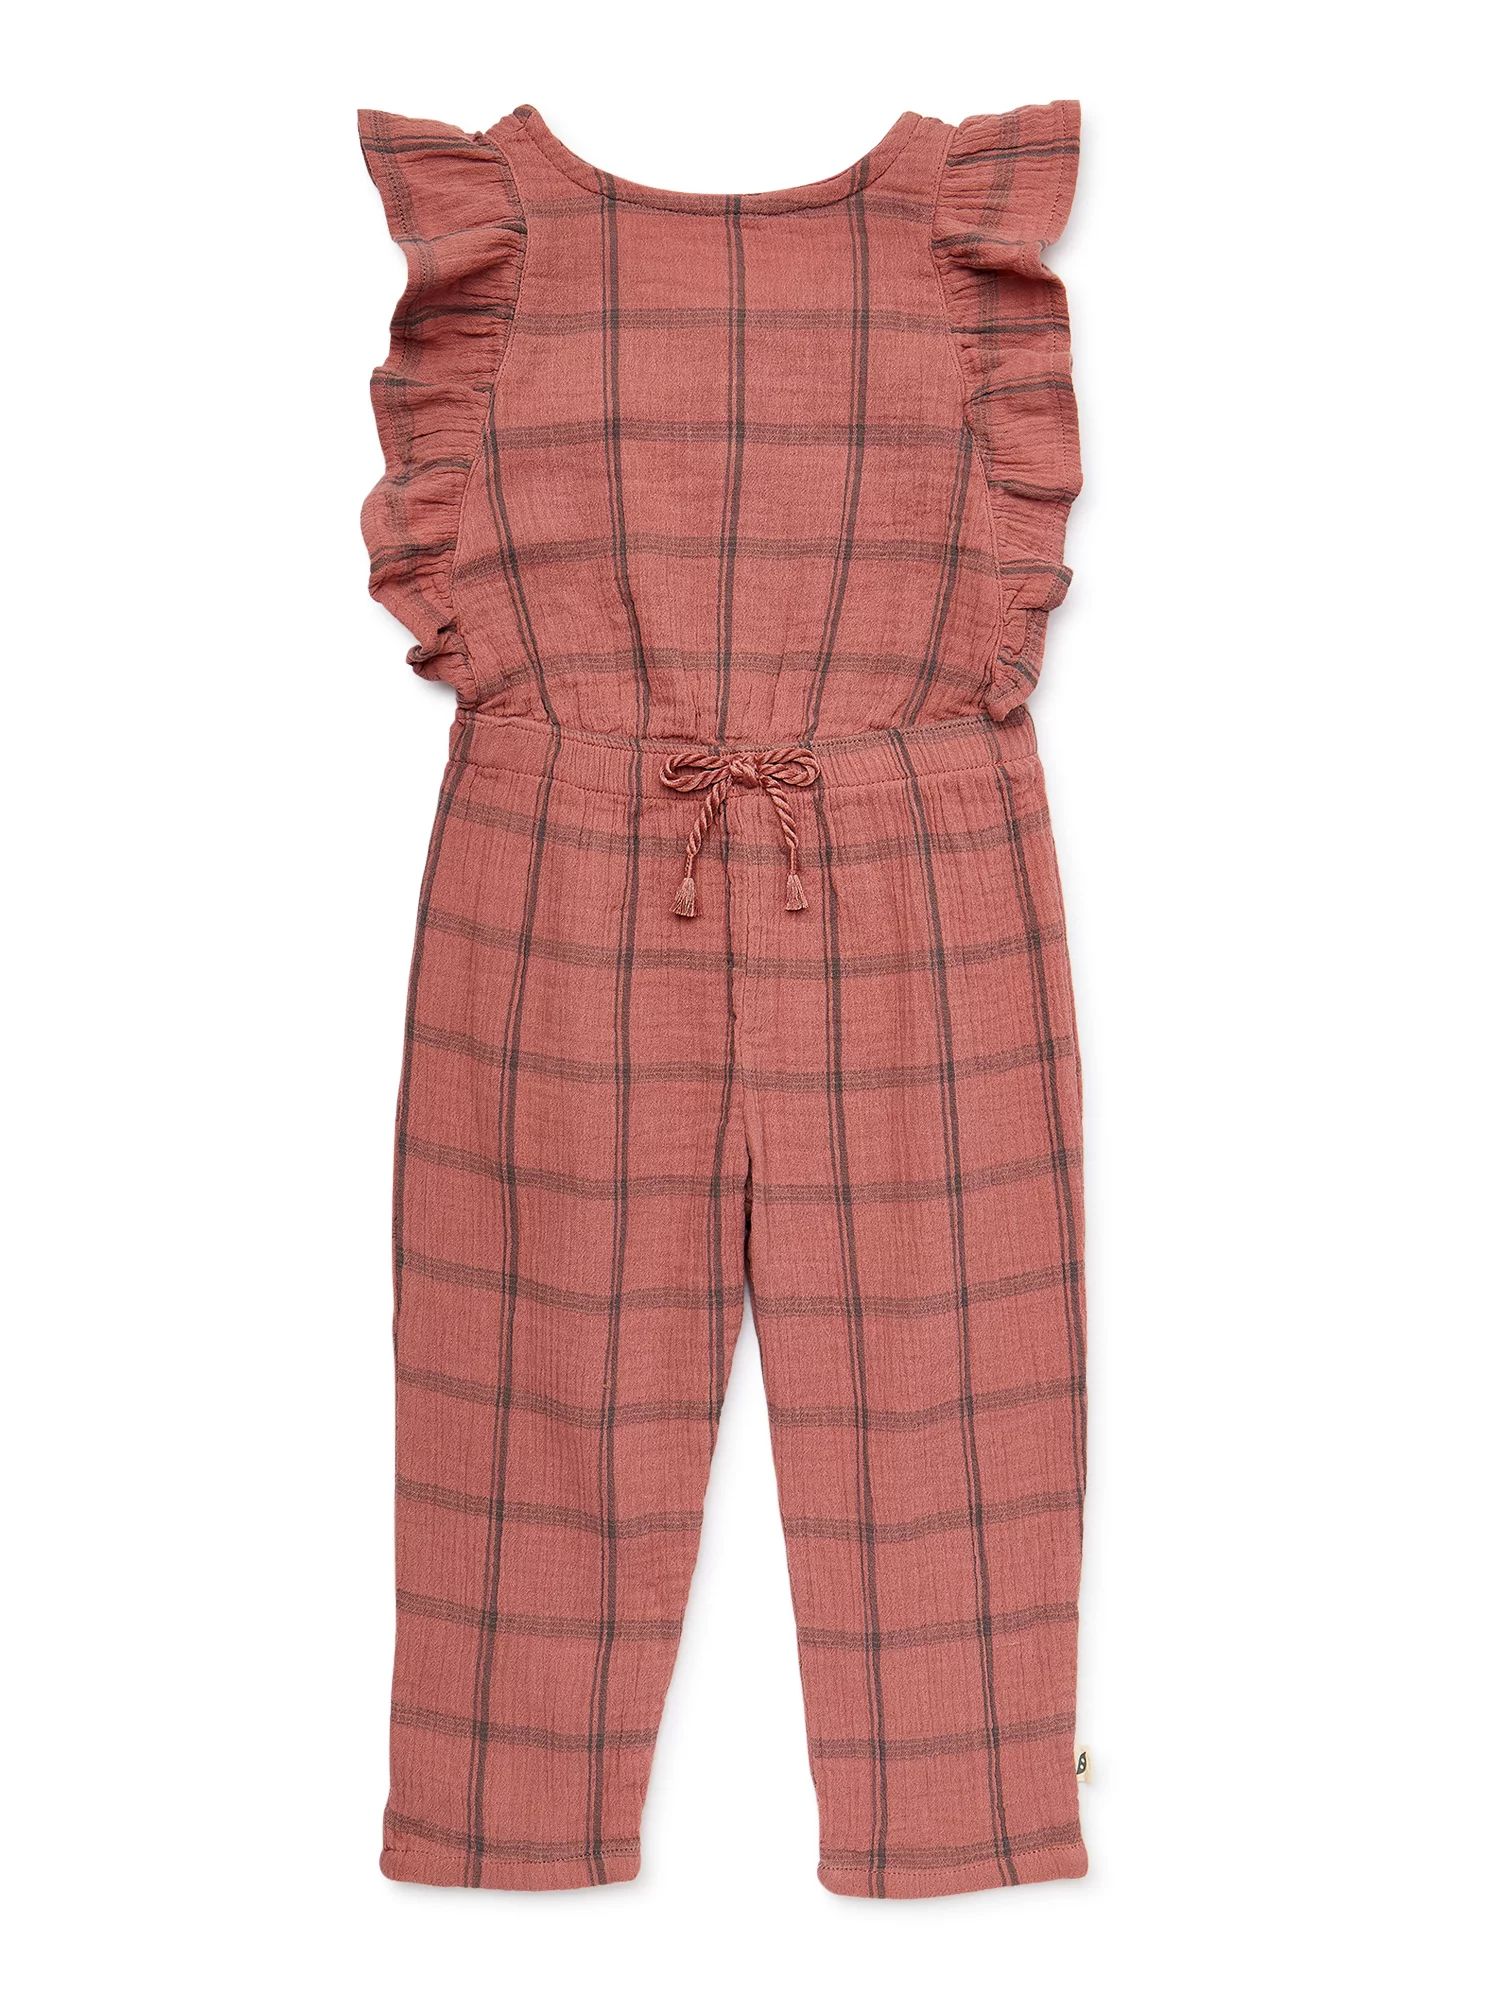 easy-peasy Baby and Toddler Girl Jumpsuit, Sizes 12 Months-5T | Walmart (US)